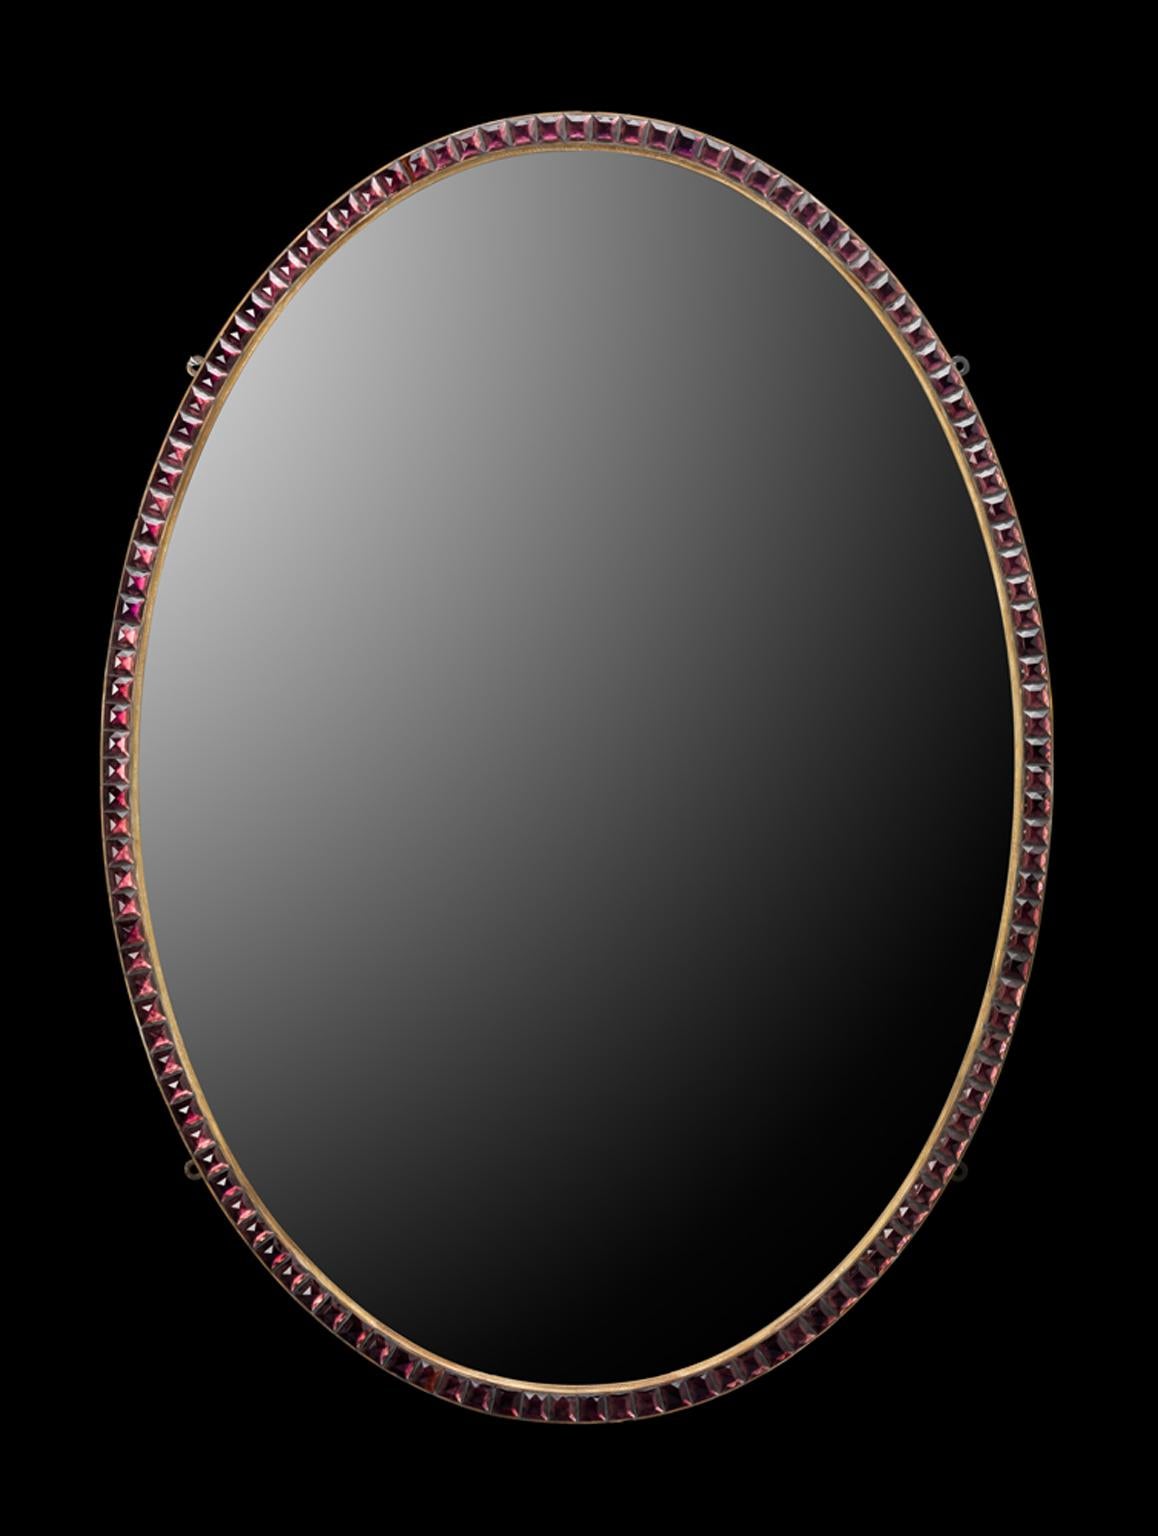 A fine Irish oval mirror with narrow moulded and gilt frame, inset with Irish glass tapered facets.